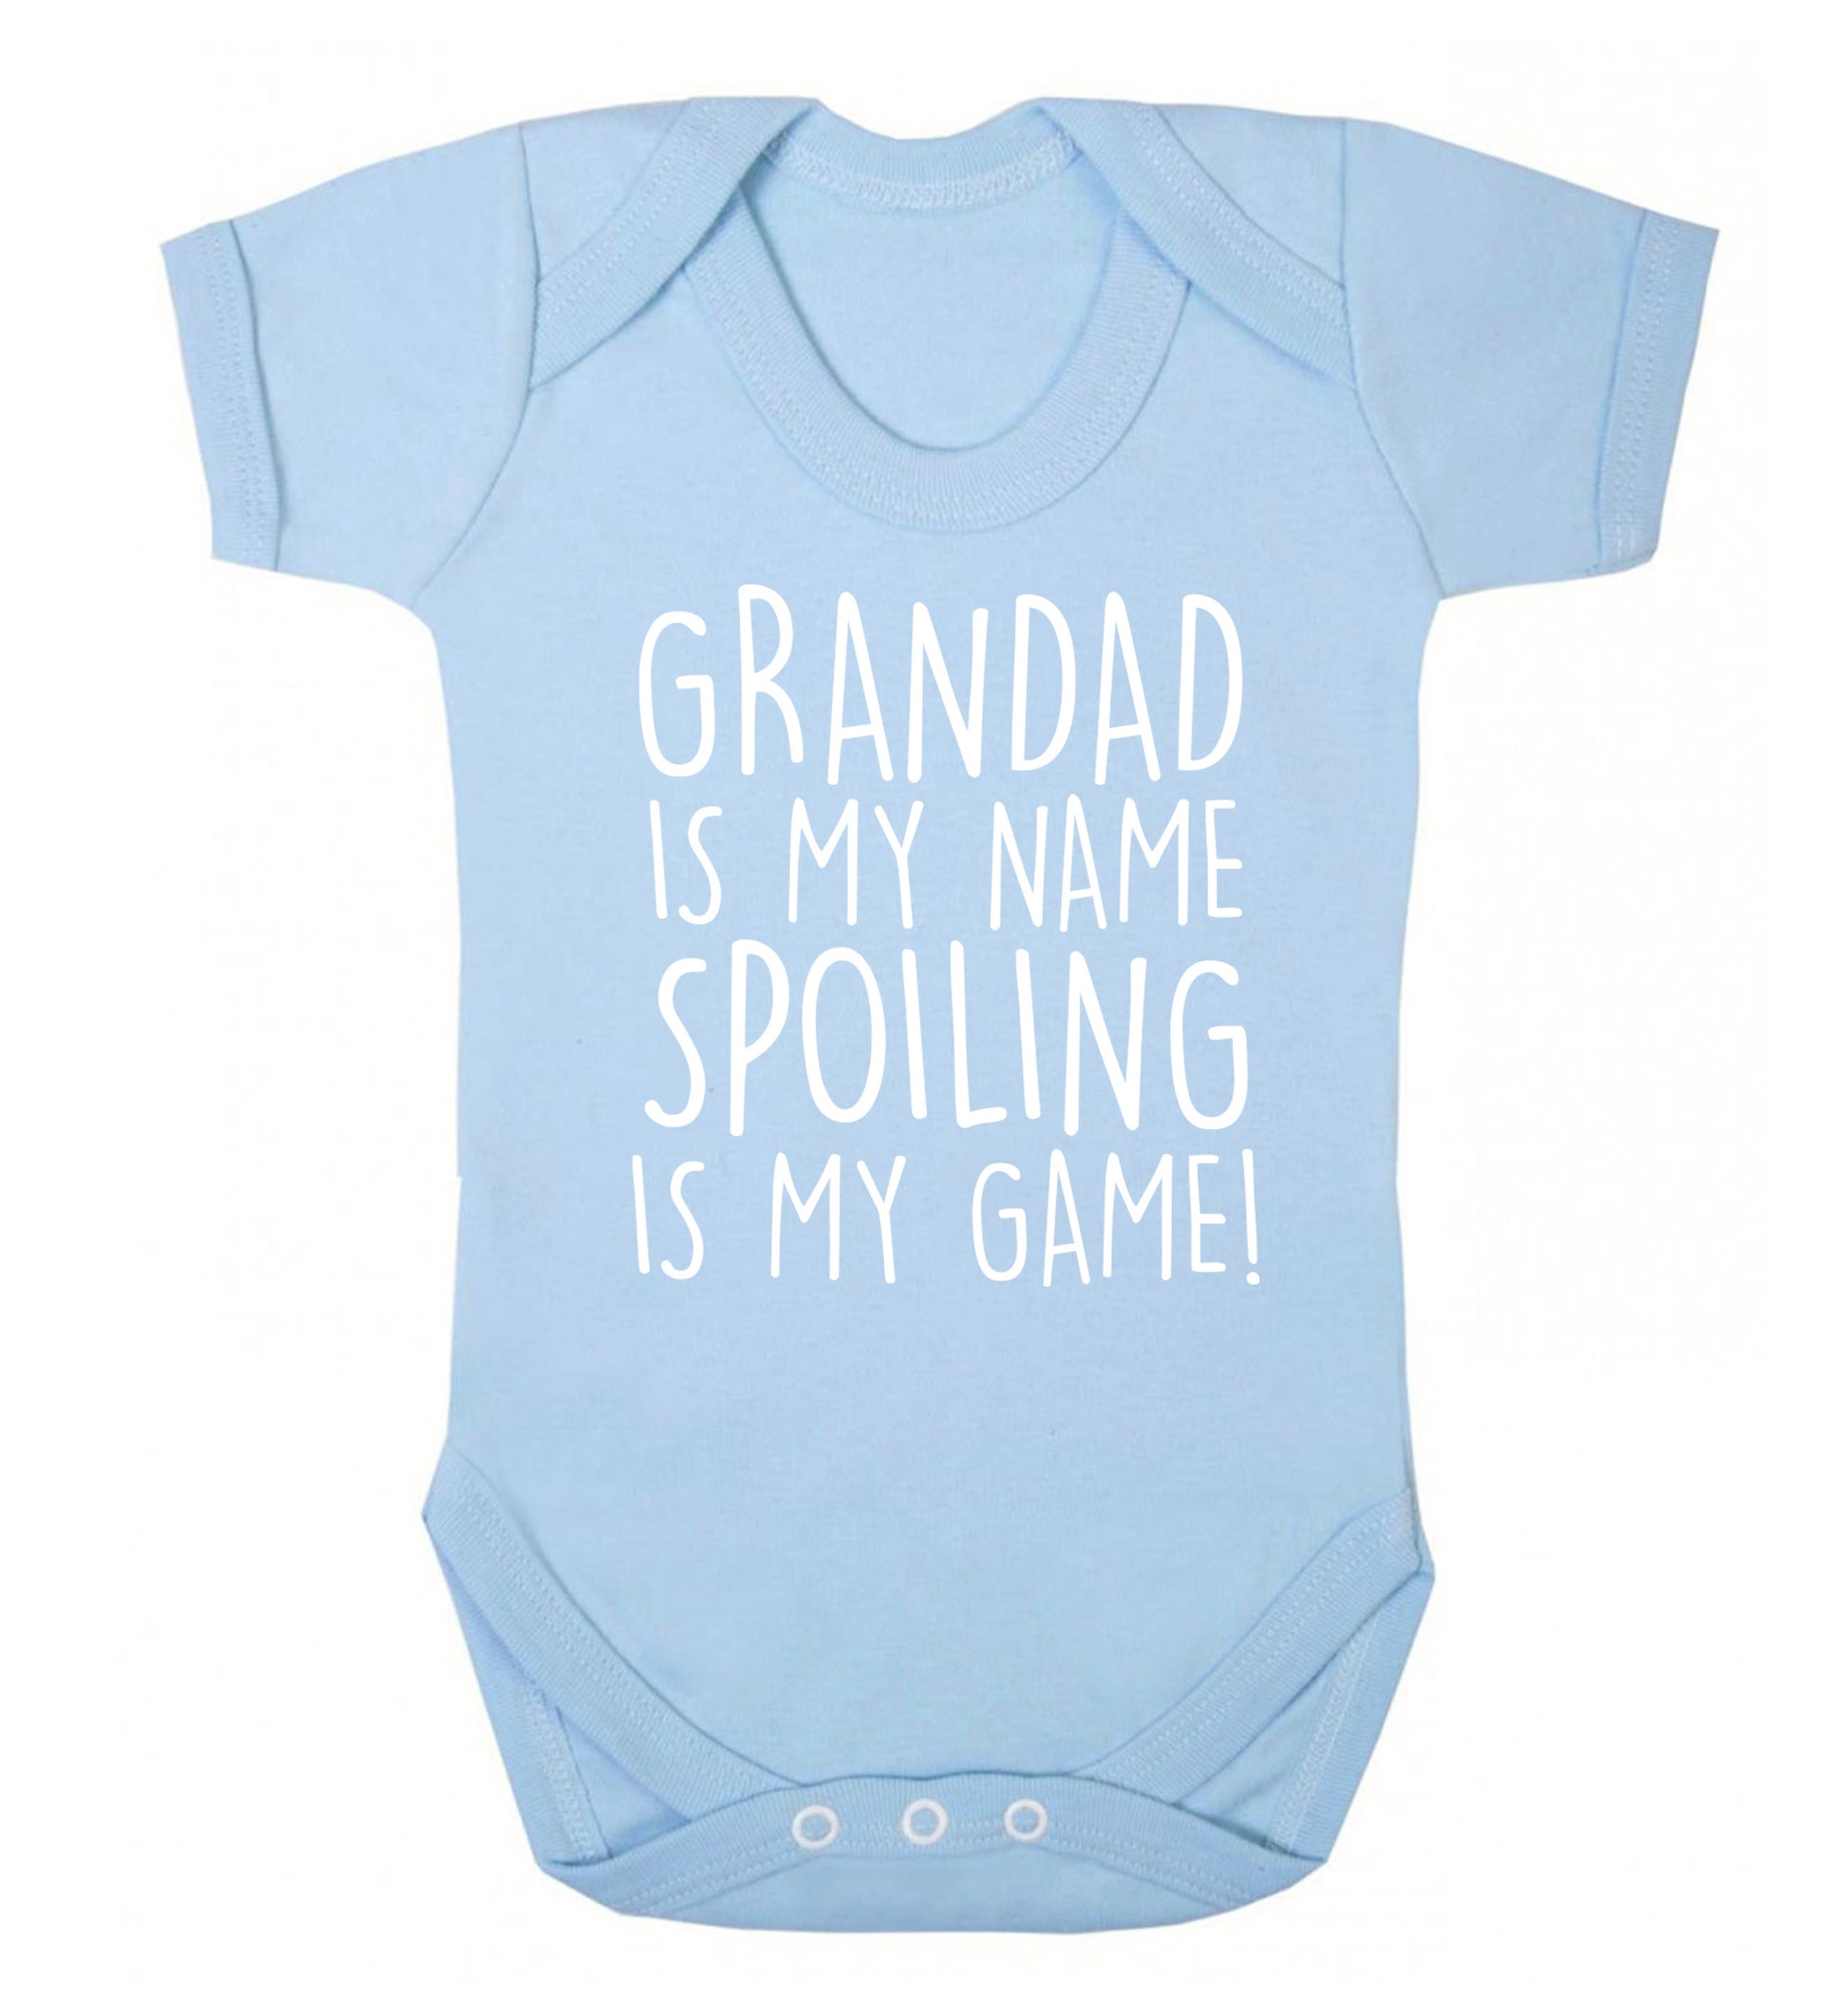 Grandad is my name, spoiling is my game Baby Vest pale blue 18-24 months